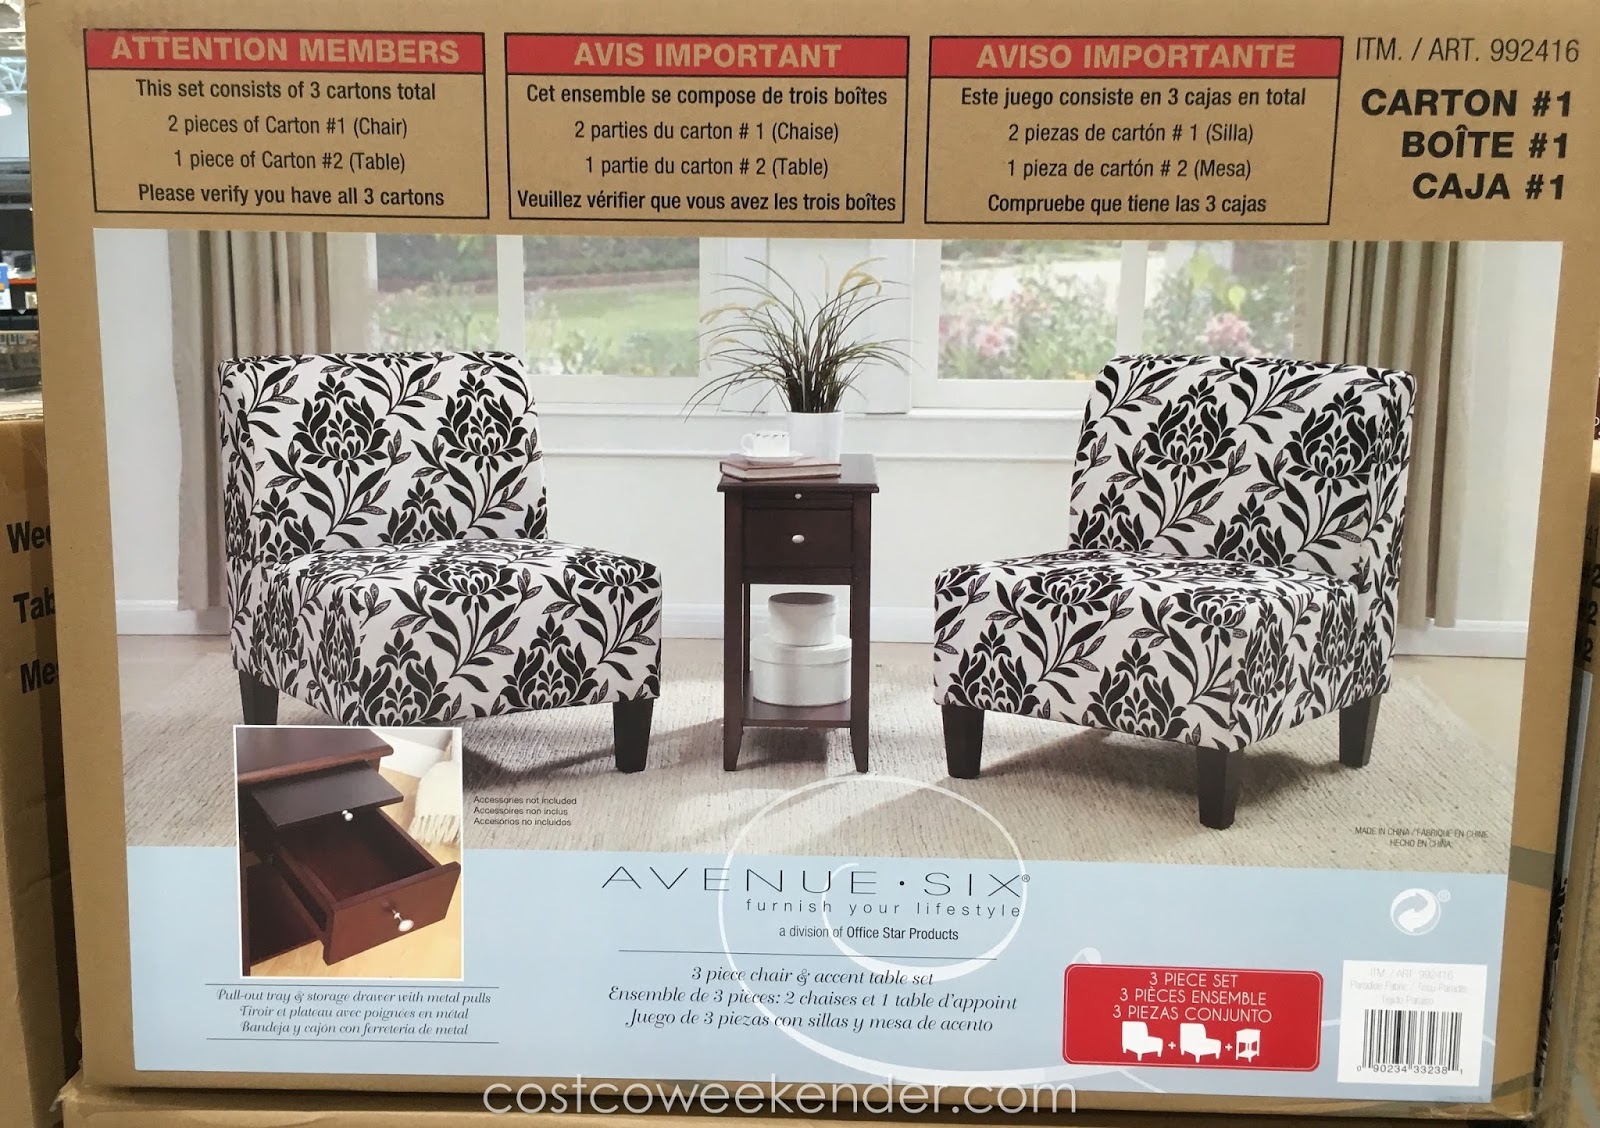 Avenue Six 3 Piece Chair And Accent Table Set Costco Weekender